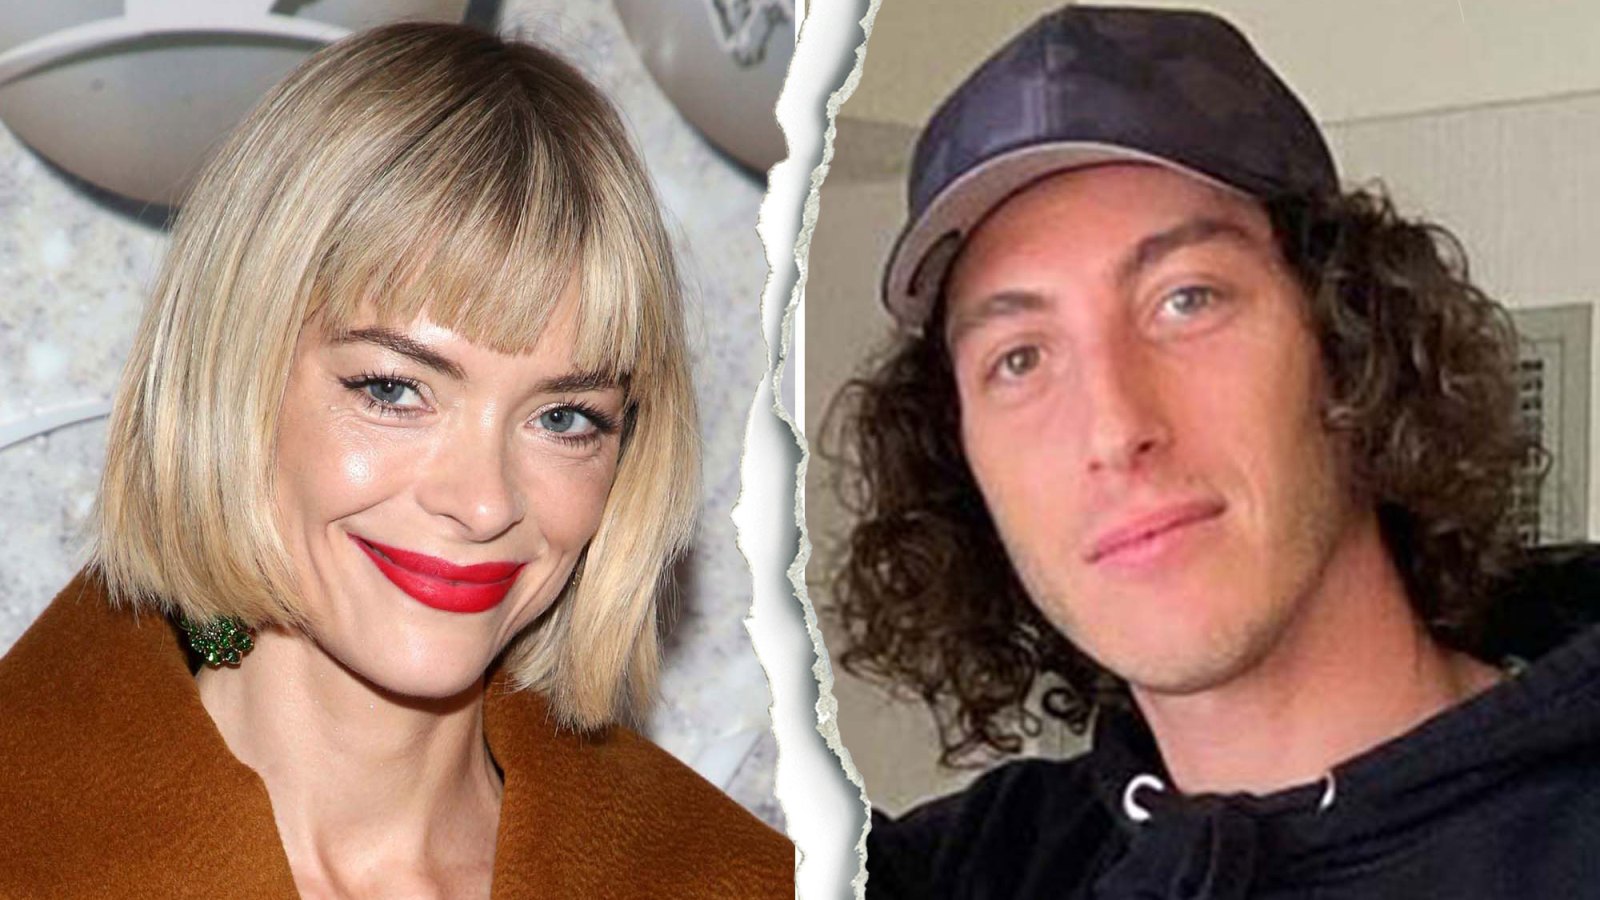 Jaime King Reveals She’s 'Not Dating' After Sharing ‘I Love You’ Photo With Sennett Devermont